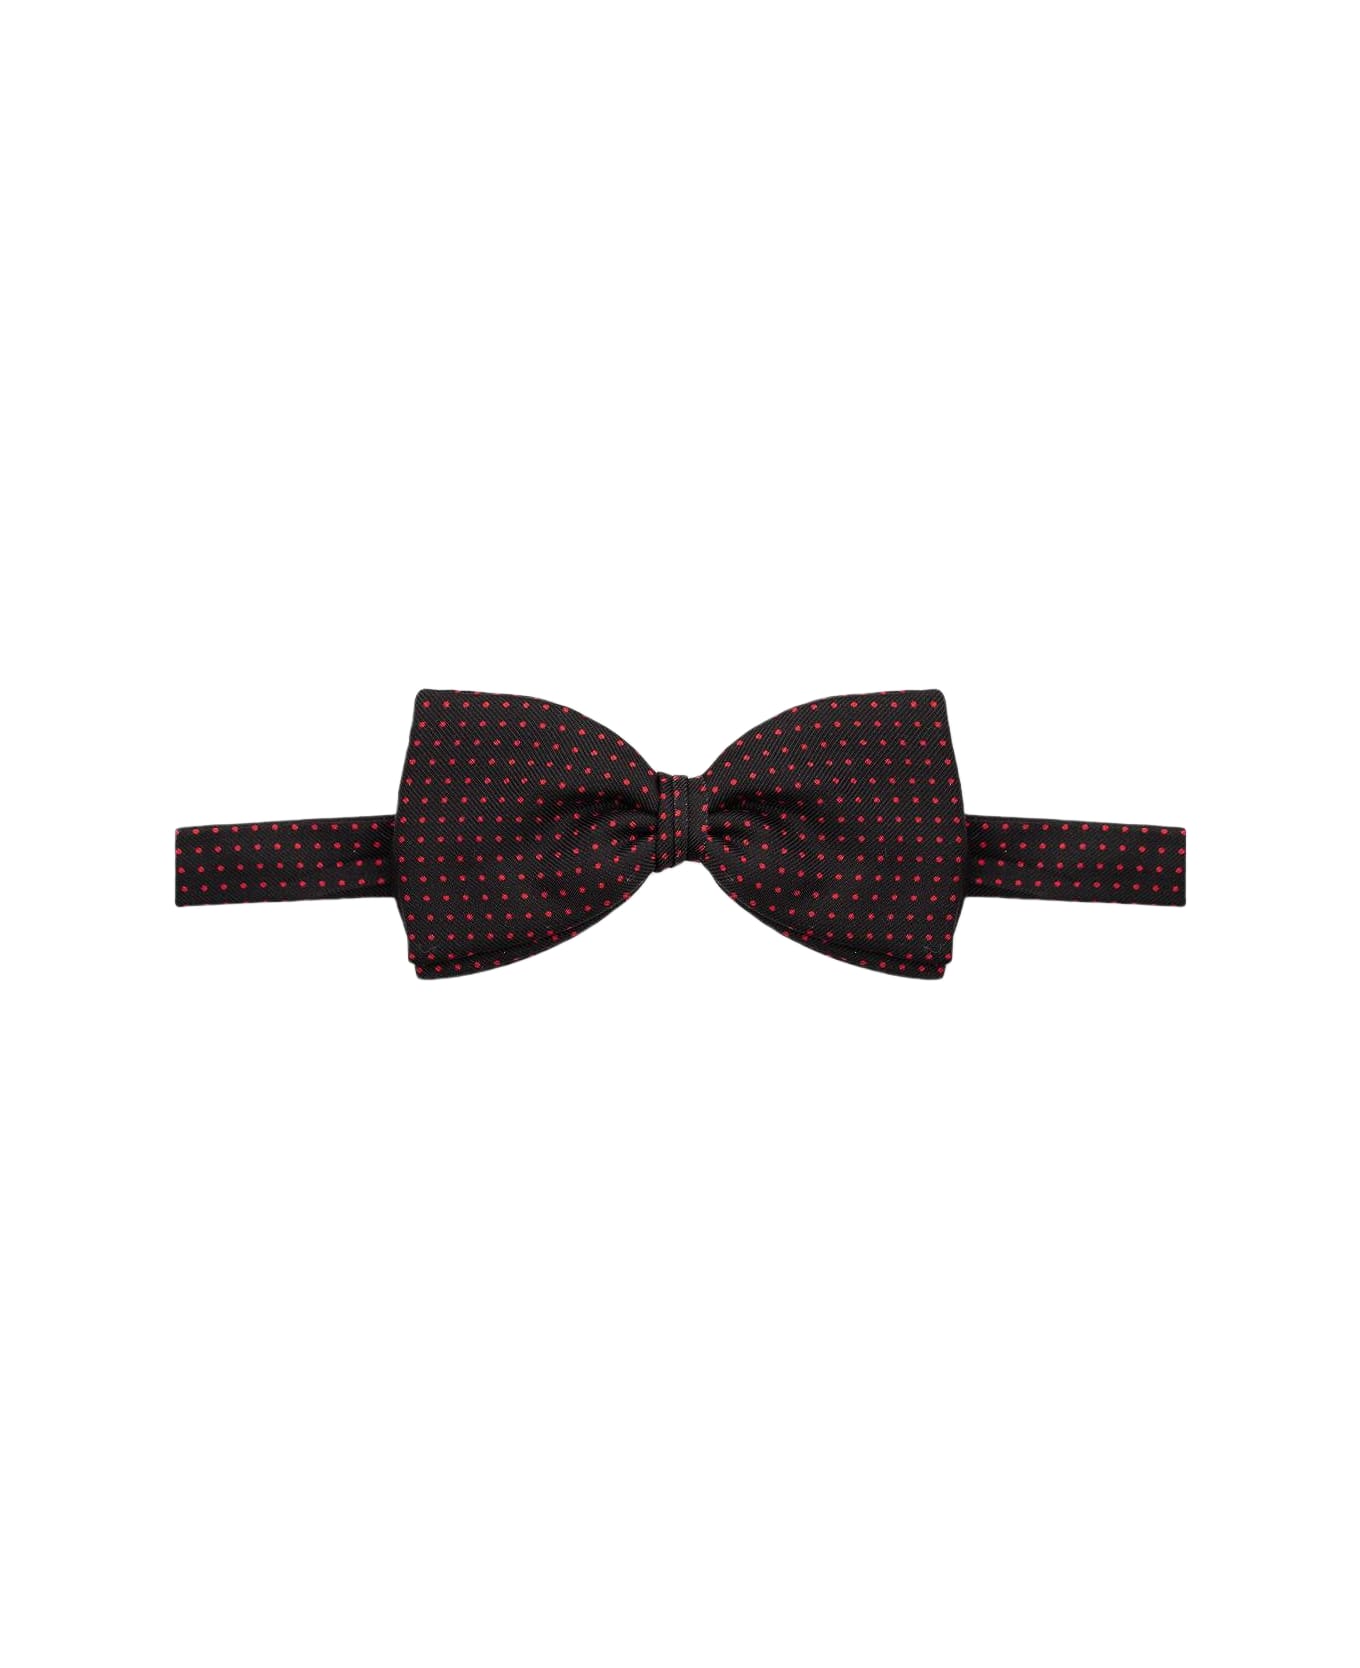 Larusmiani Bow Tie 'pois' Tie - Red ネクタイ